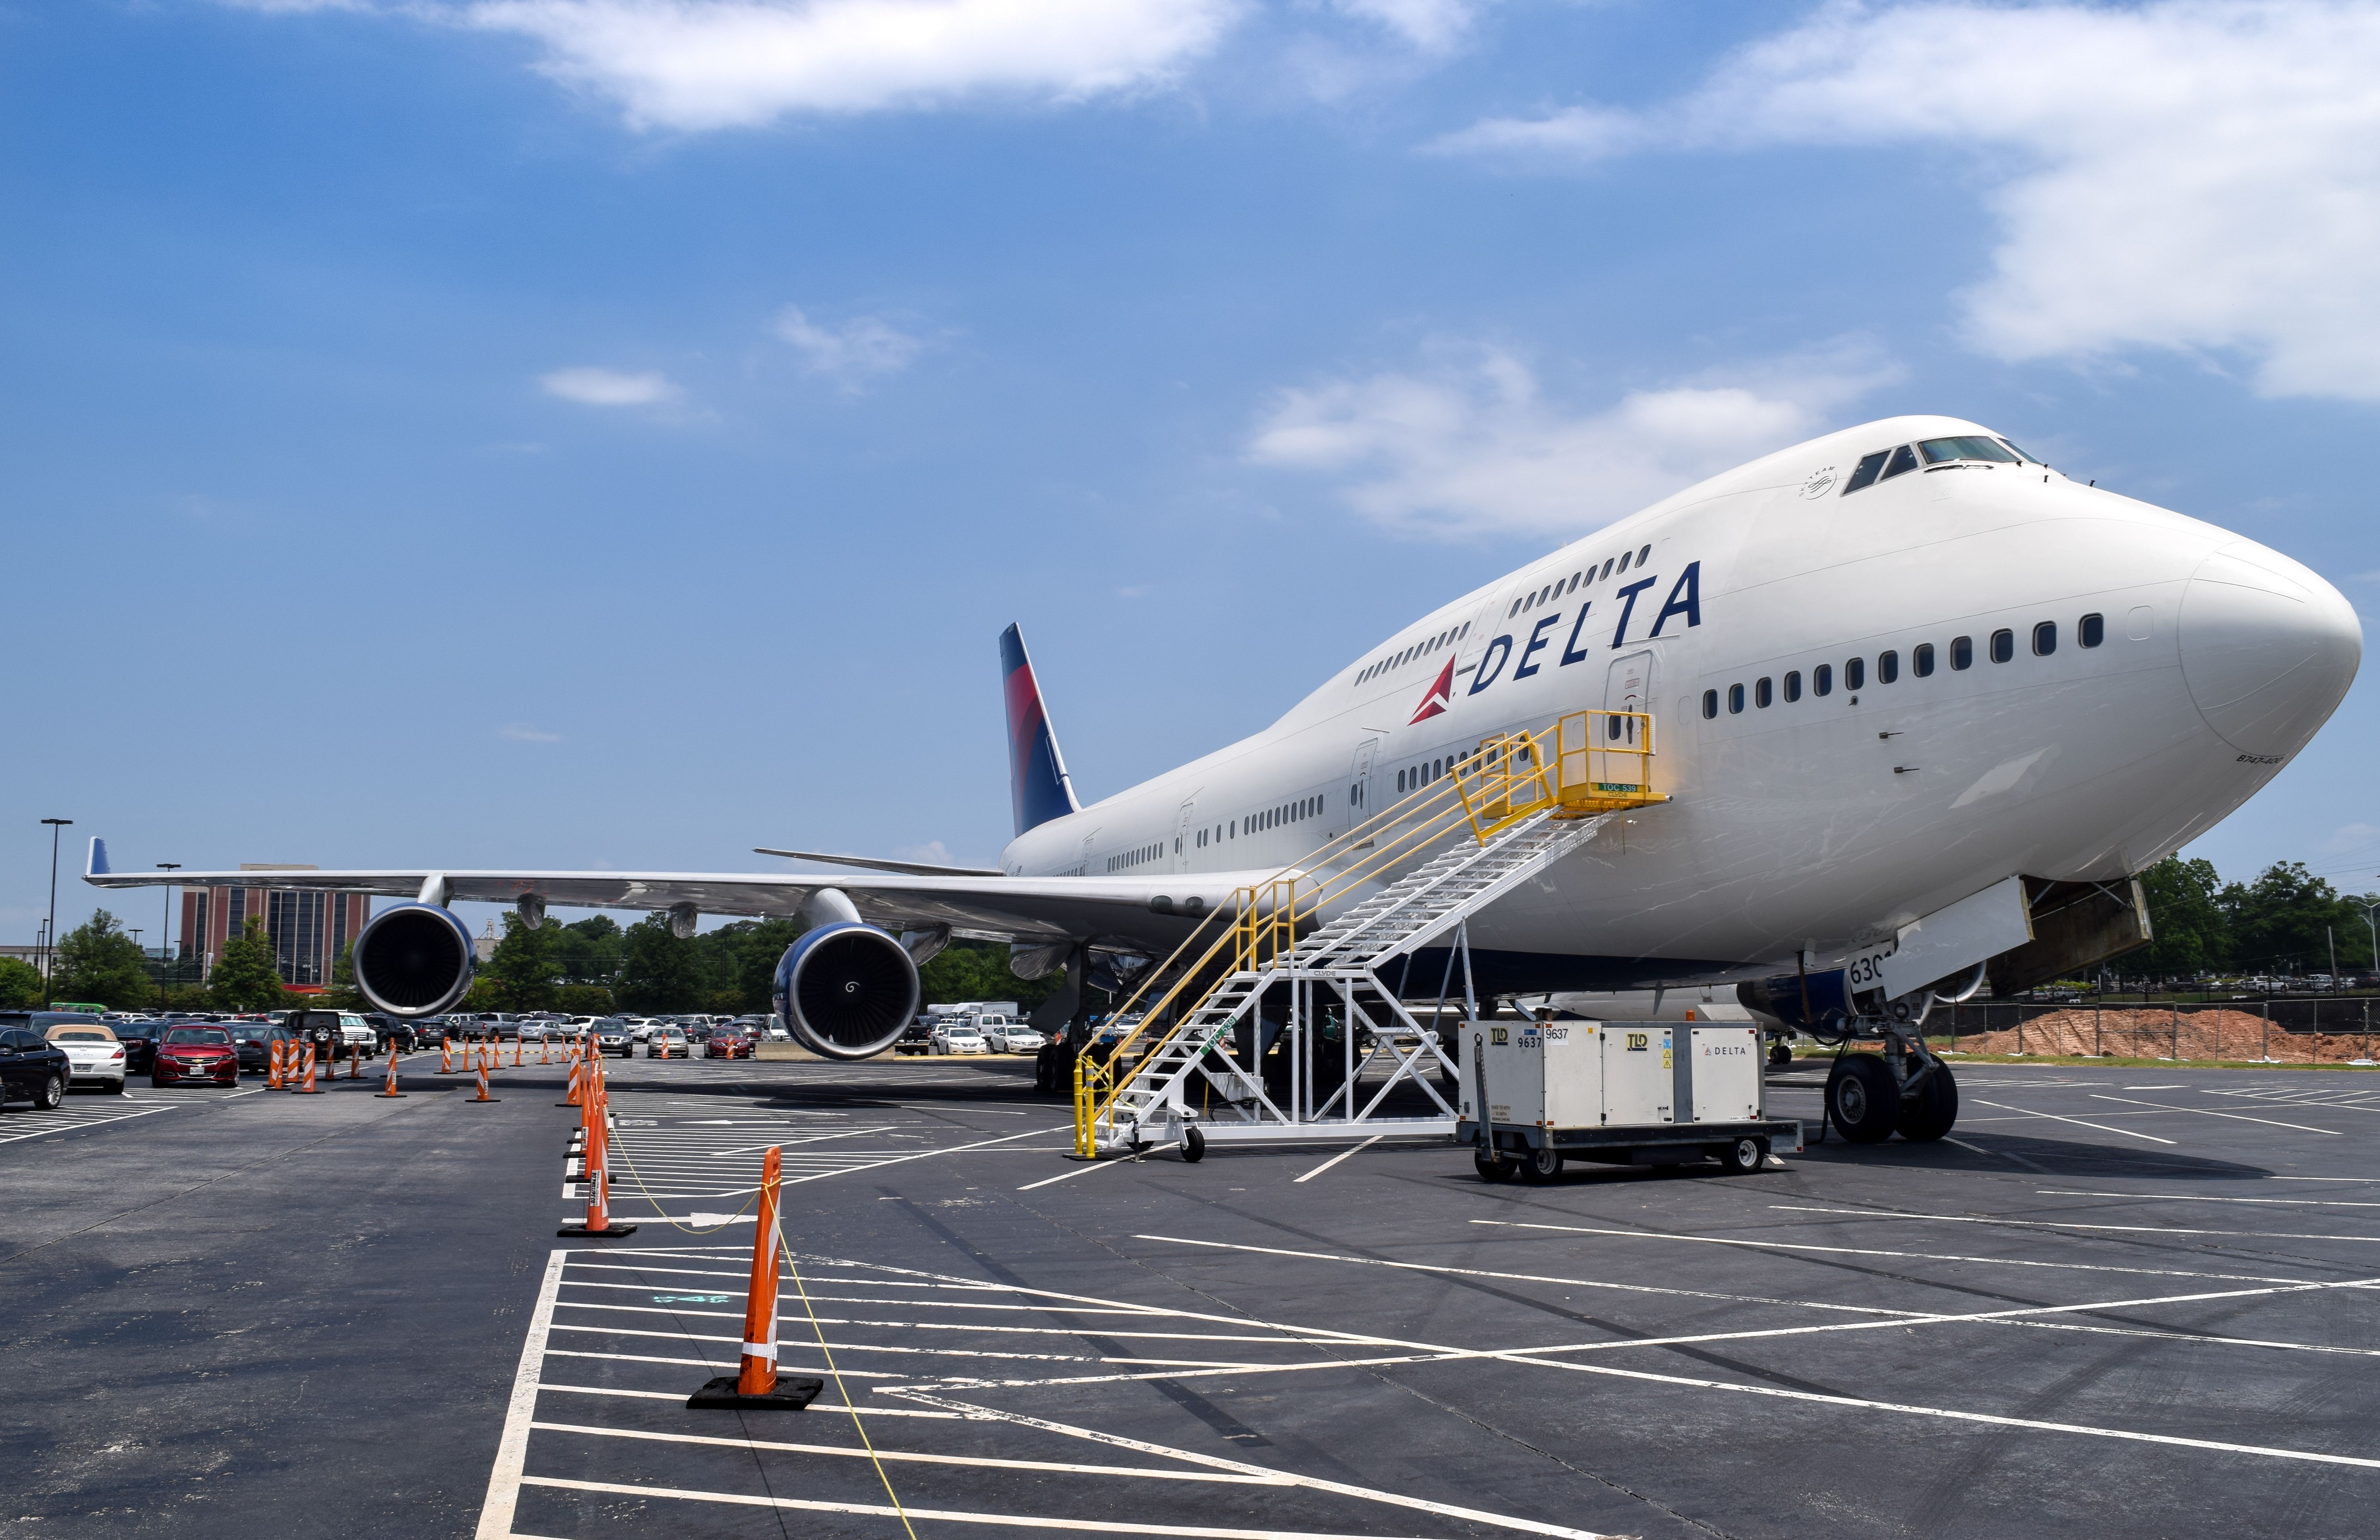 A Delta Air Lines Boeing 747-400 Parked at an airport.